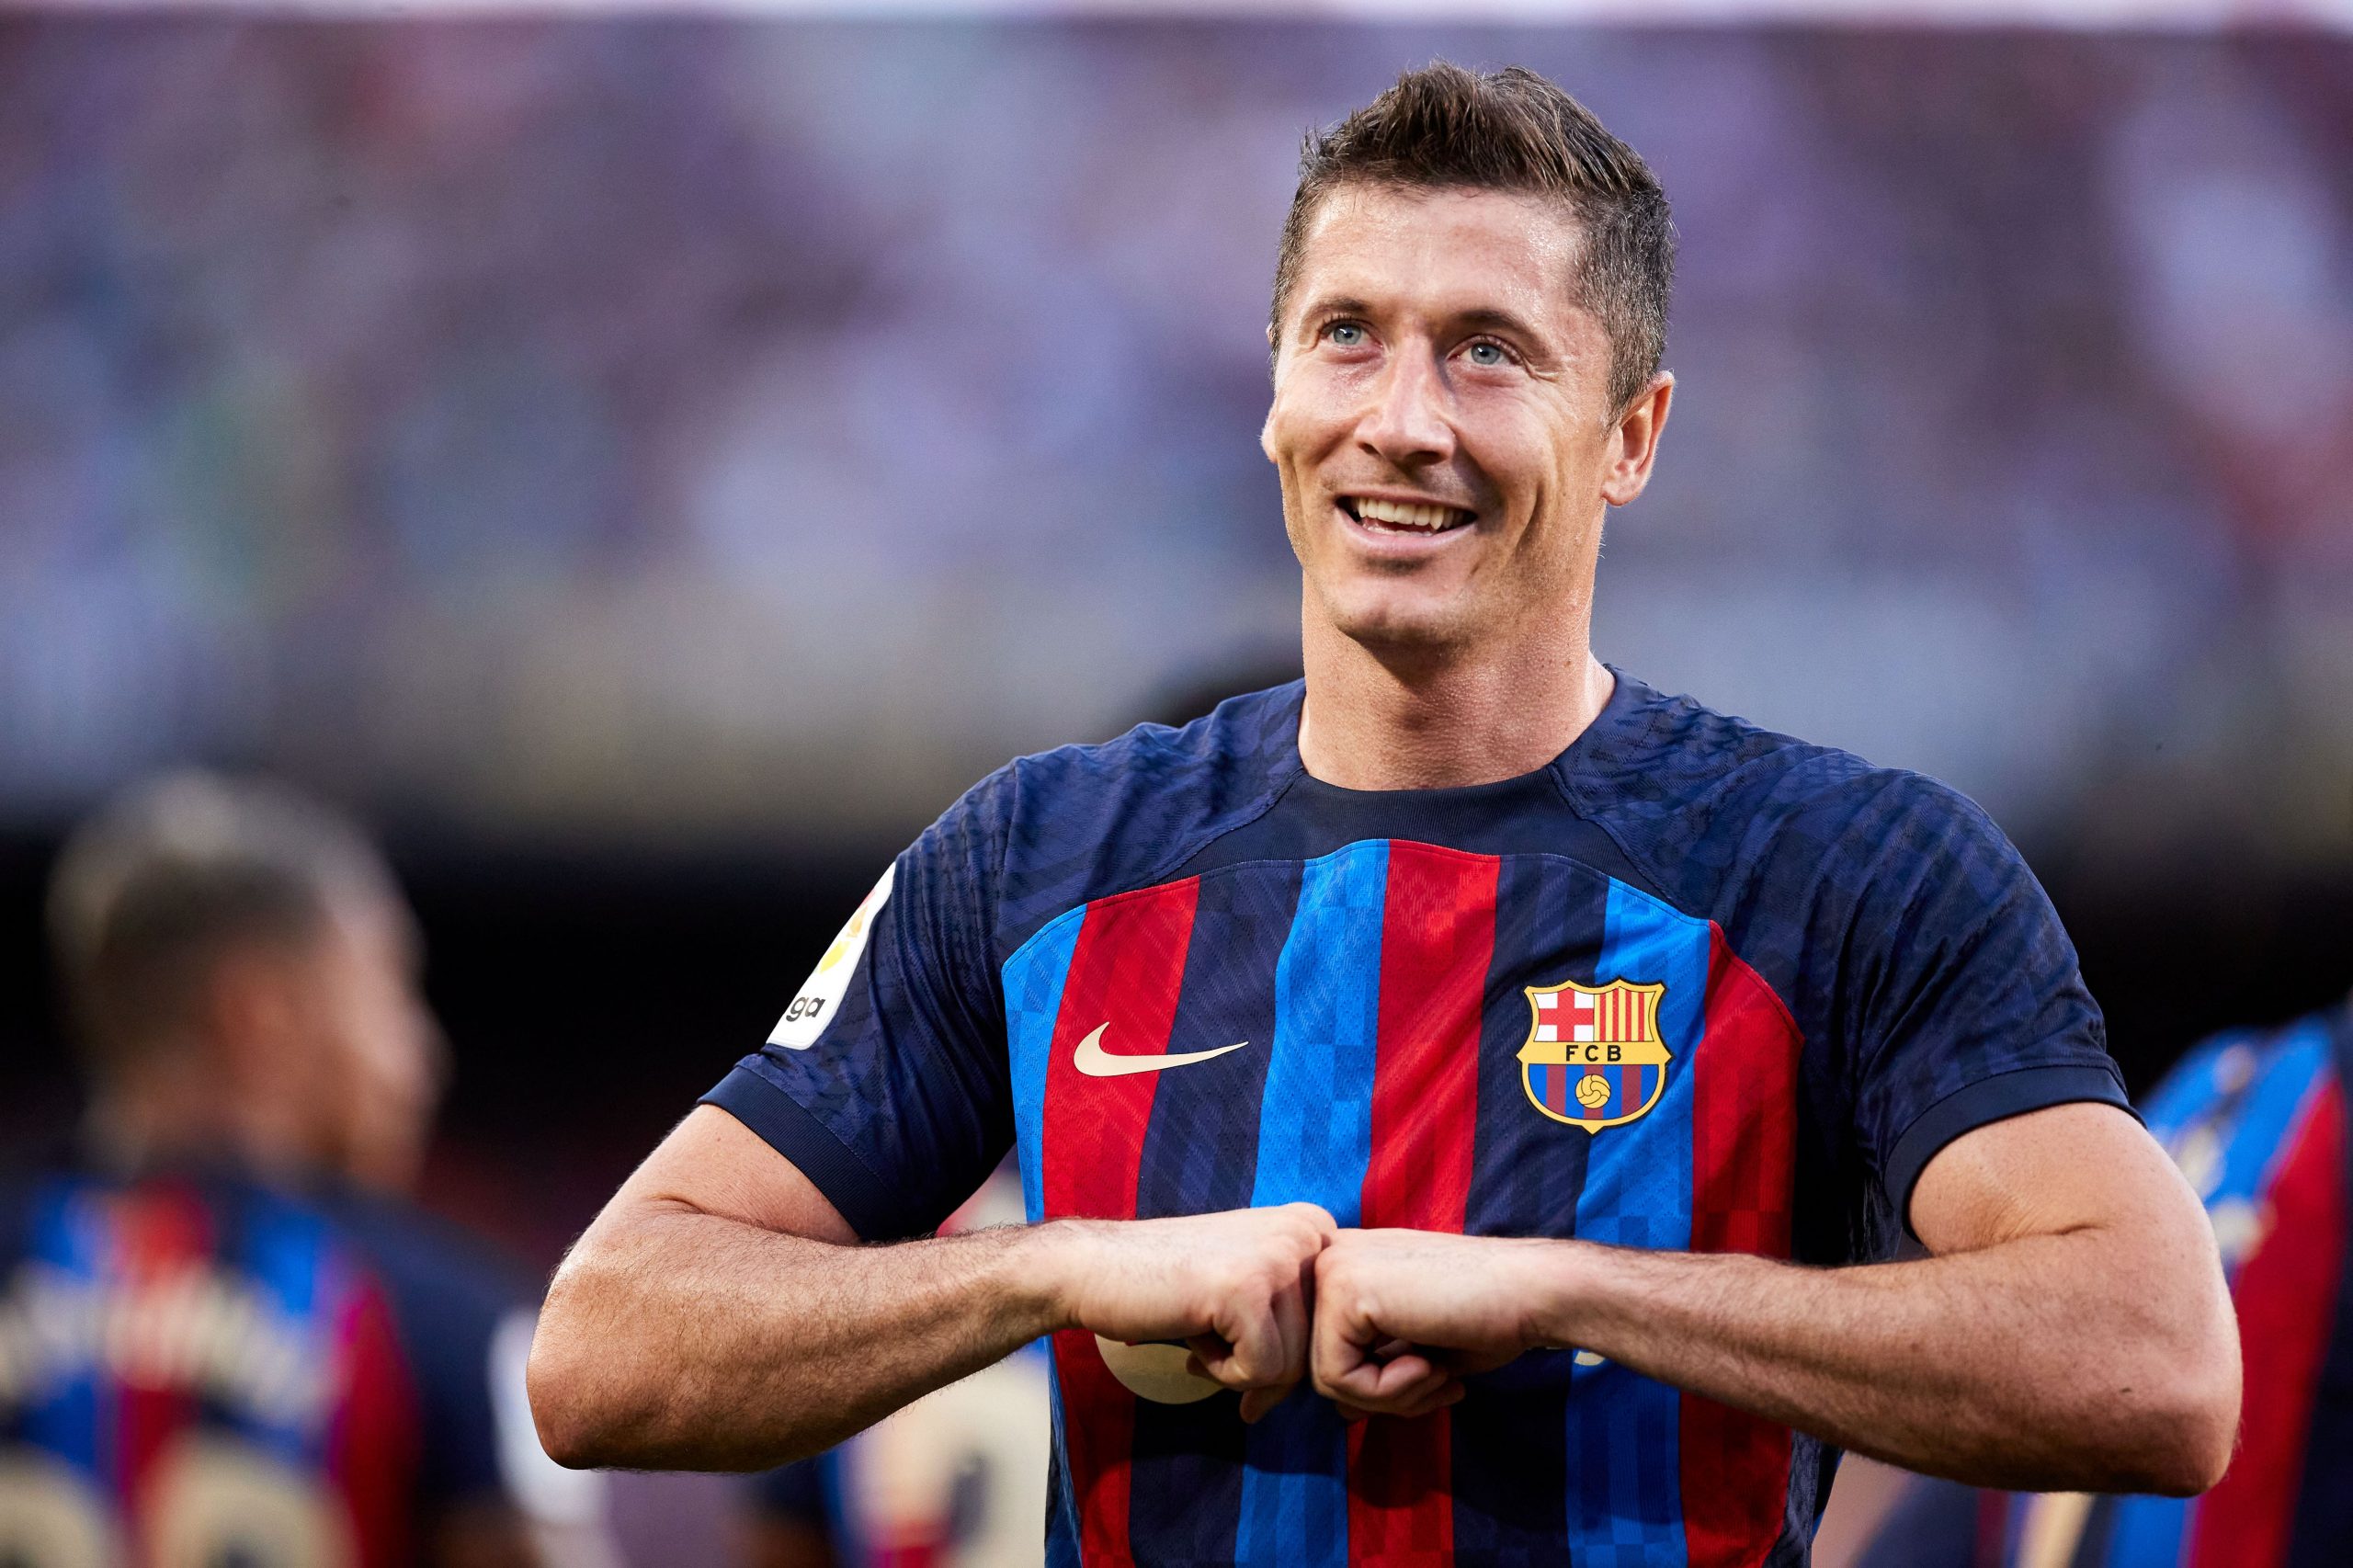 2022-23 UEFA Champions League predictions and best bets: Barcelona gamble could pay off